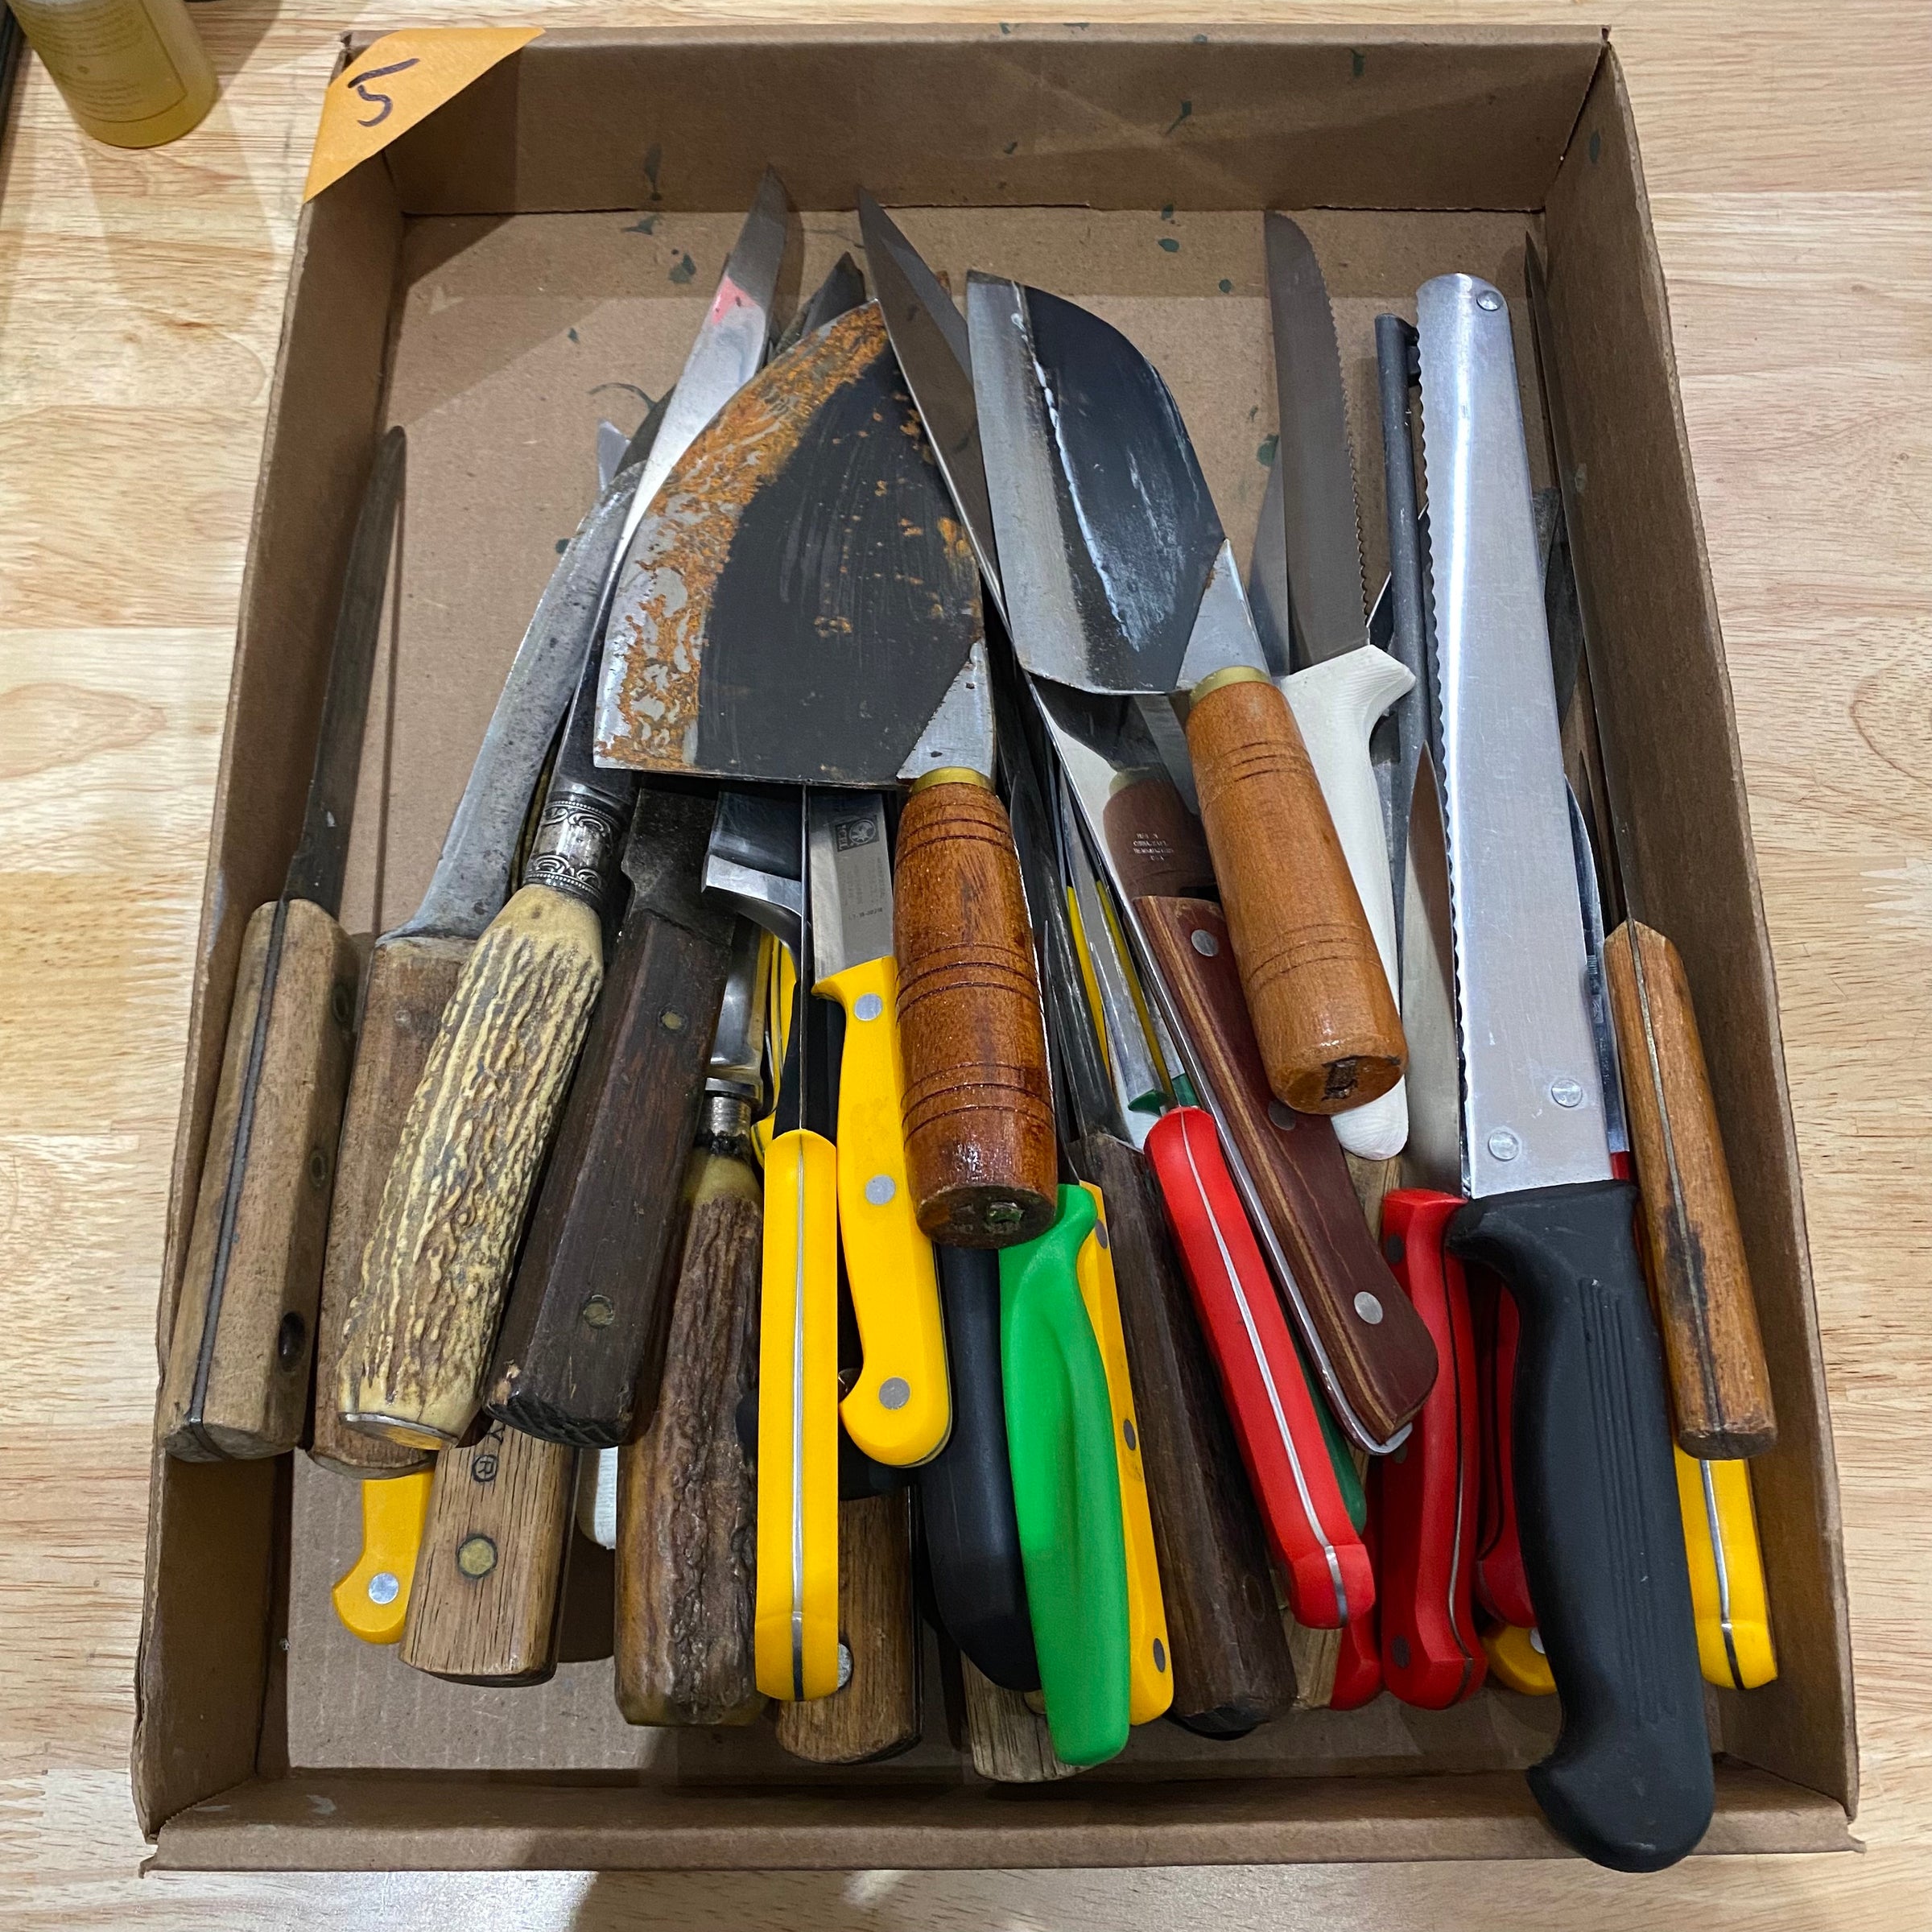 Helle Knives - Are you going to sort through your knife collection this  weekend? 🔪🔪🔪 Given that our inventory goes back almost a century, we get  a lot of questions about old